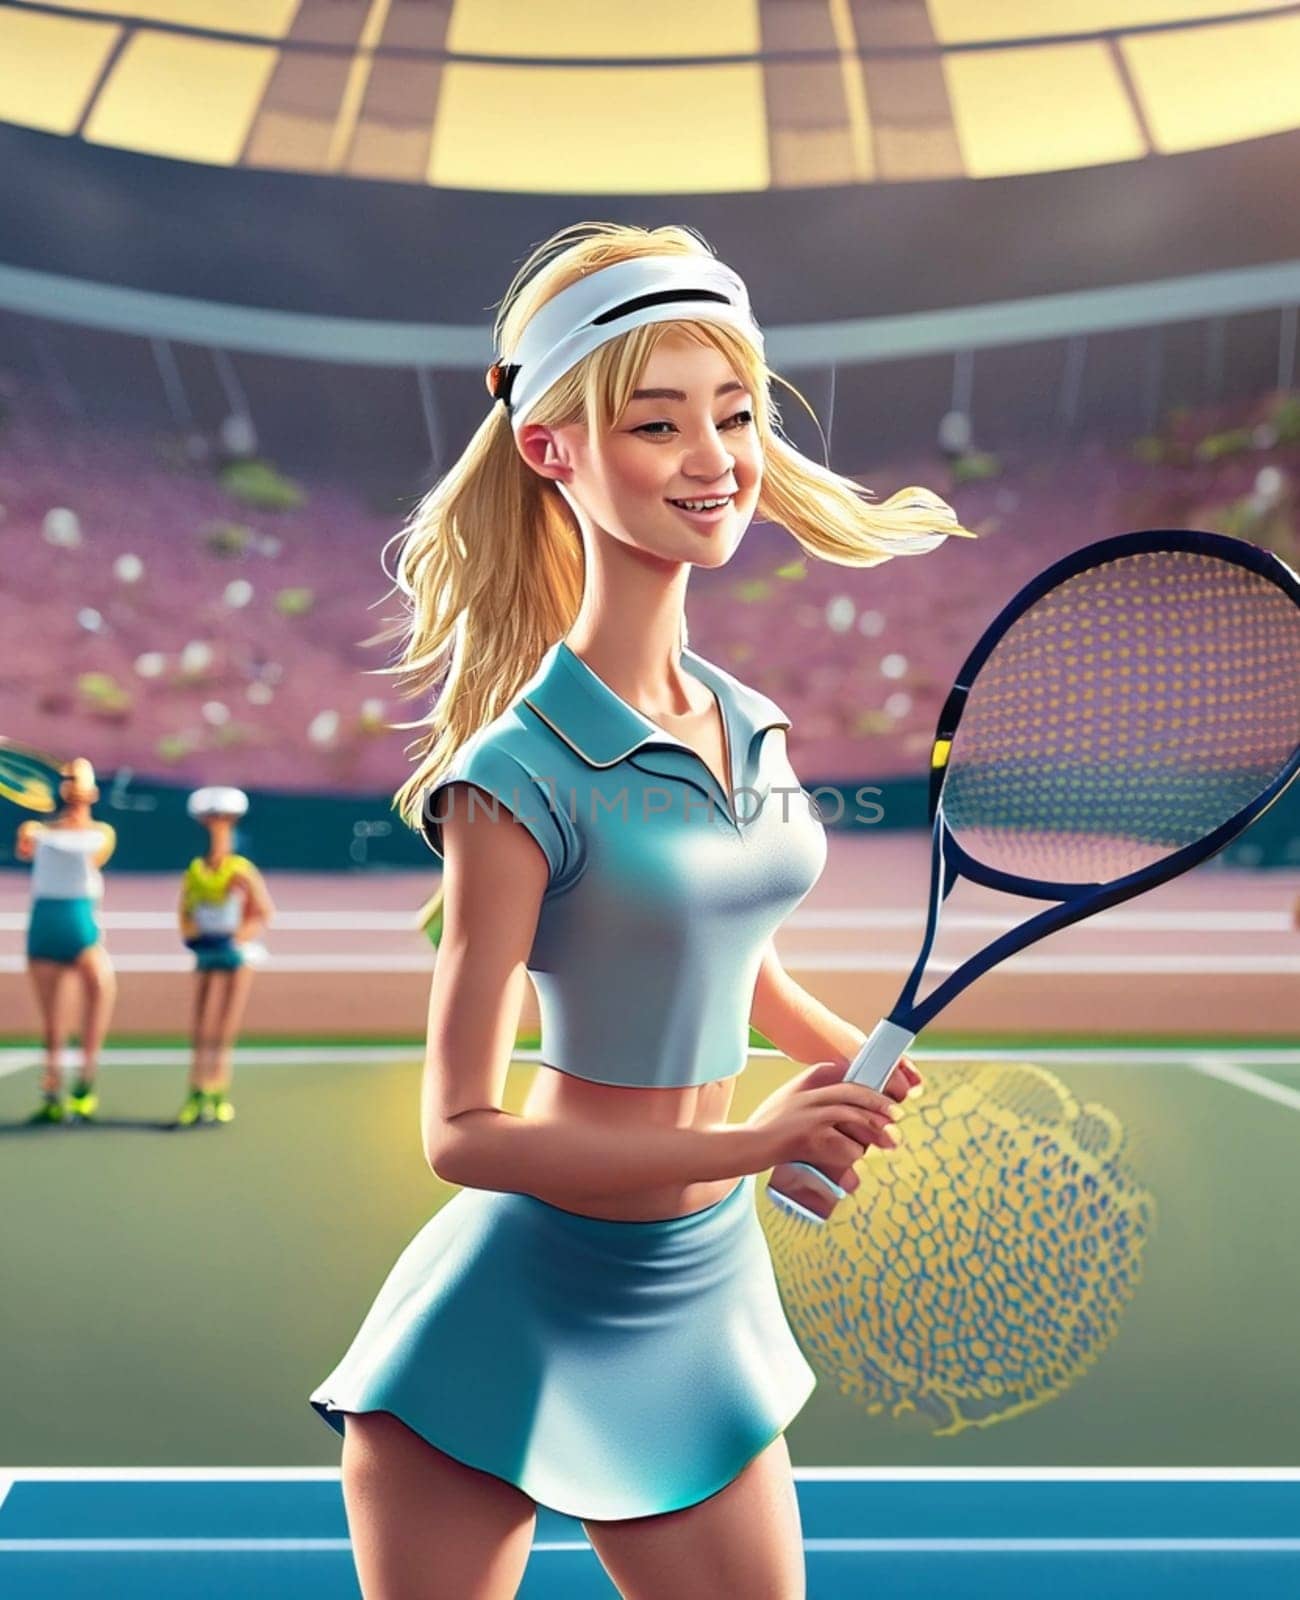 A young girl tennis player in cartoon style poses n a open big tennis court by Costin